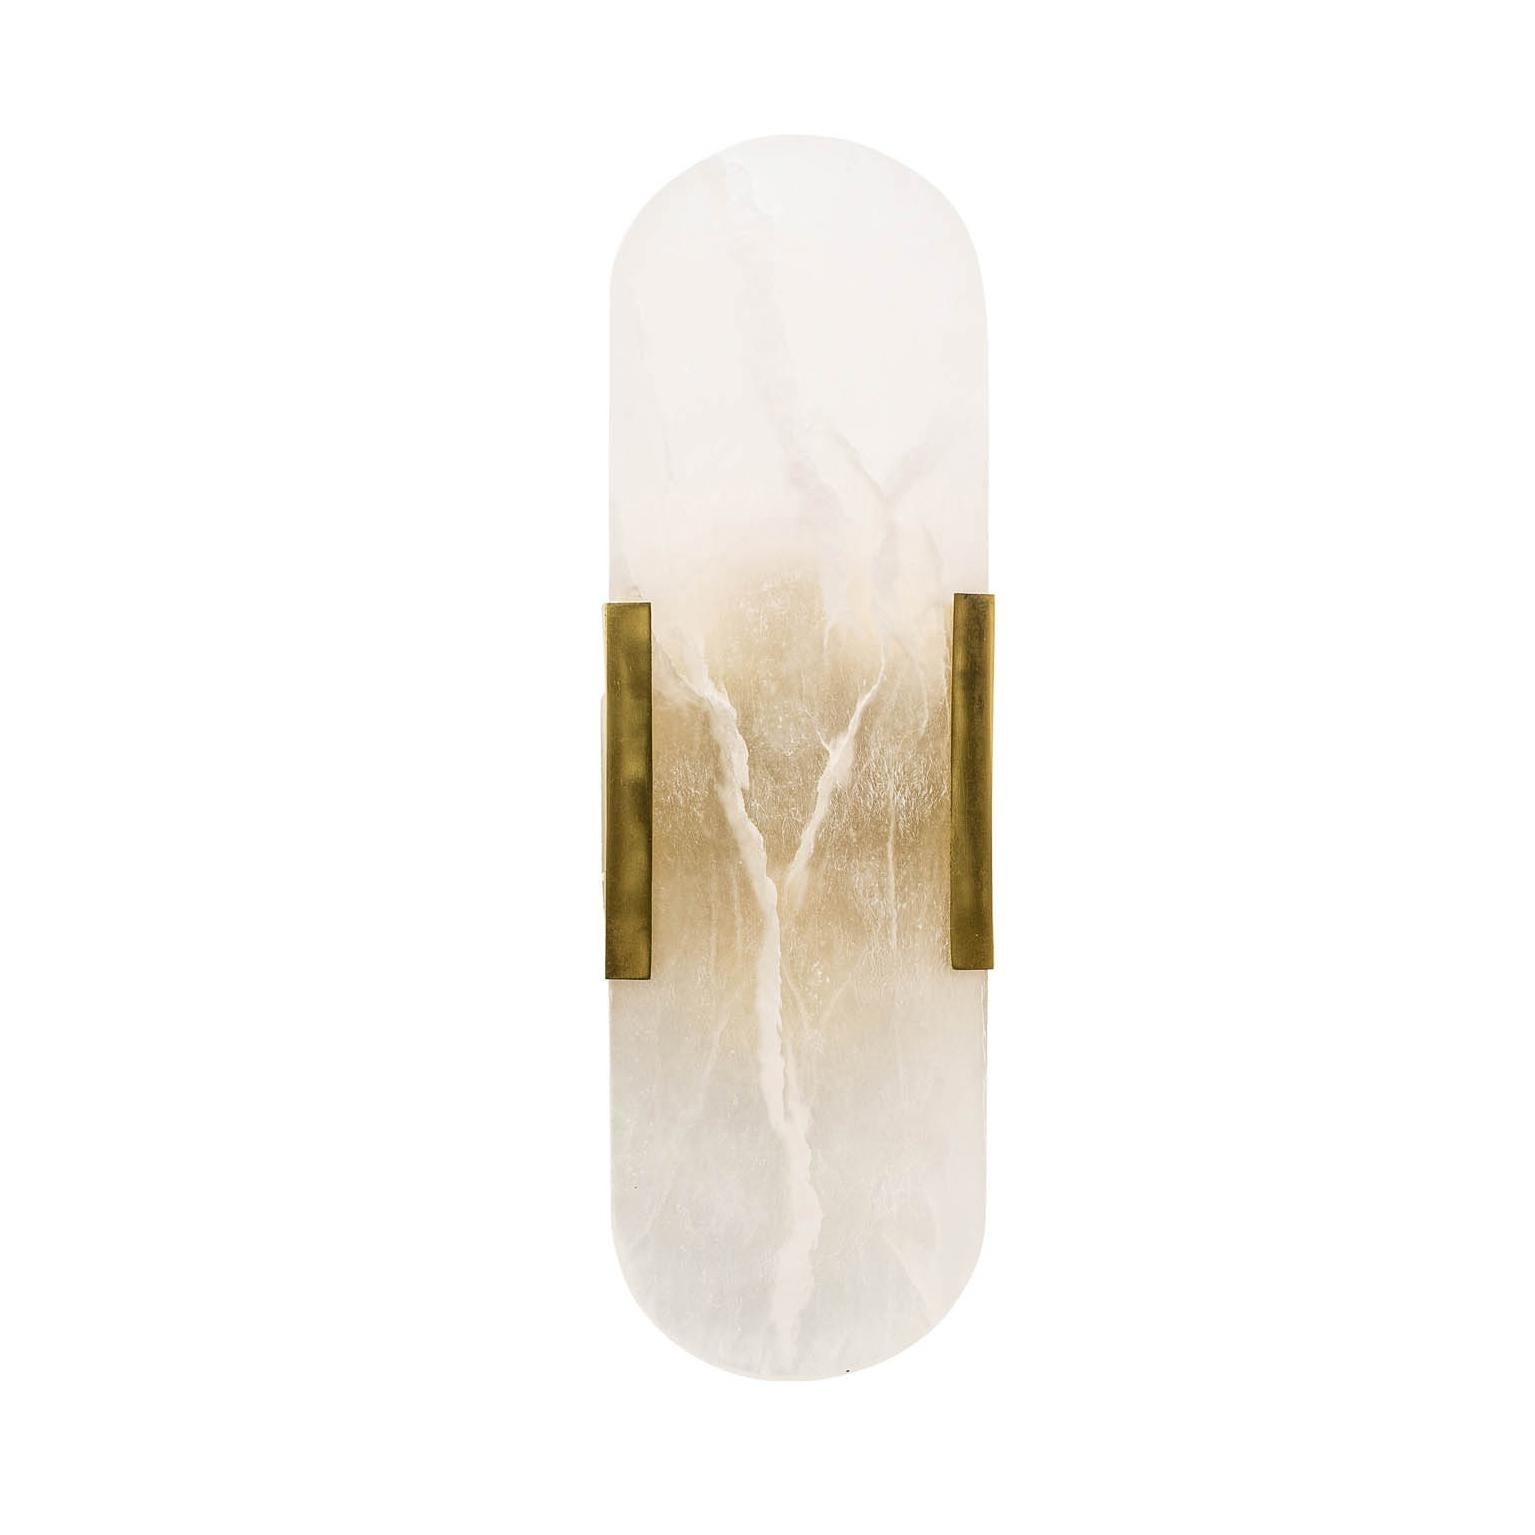 Brass and white Alabaster wall light, elegant, presence and class all in transparency. New item, never used.